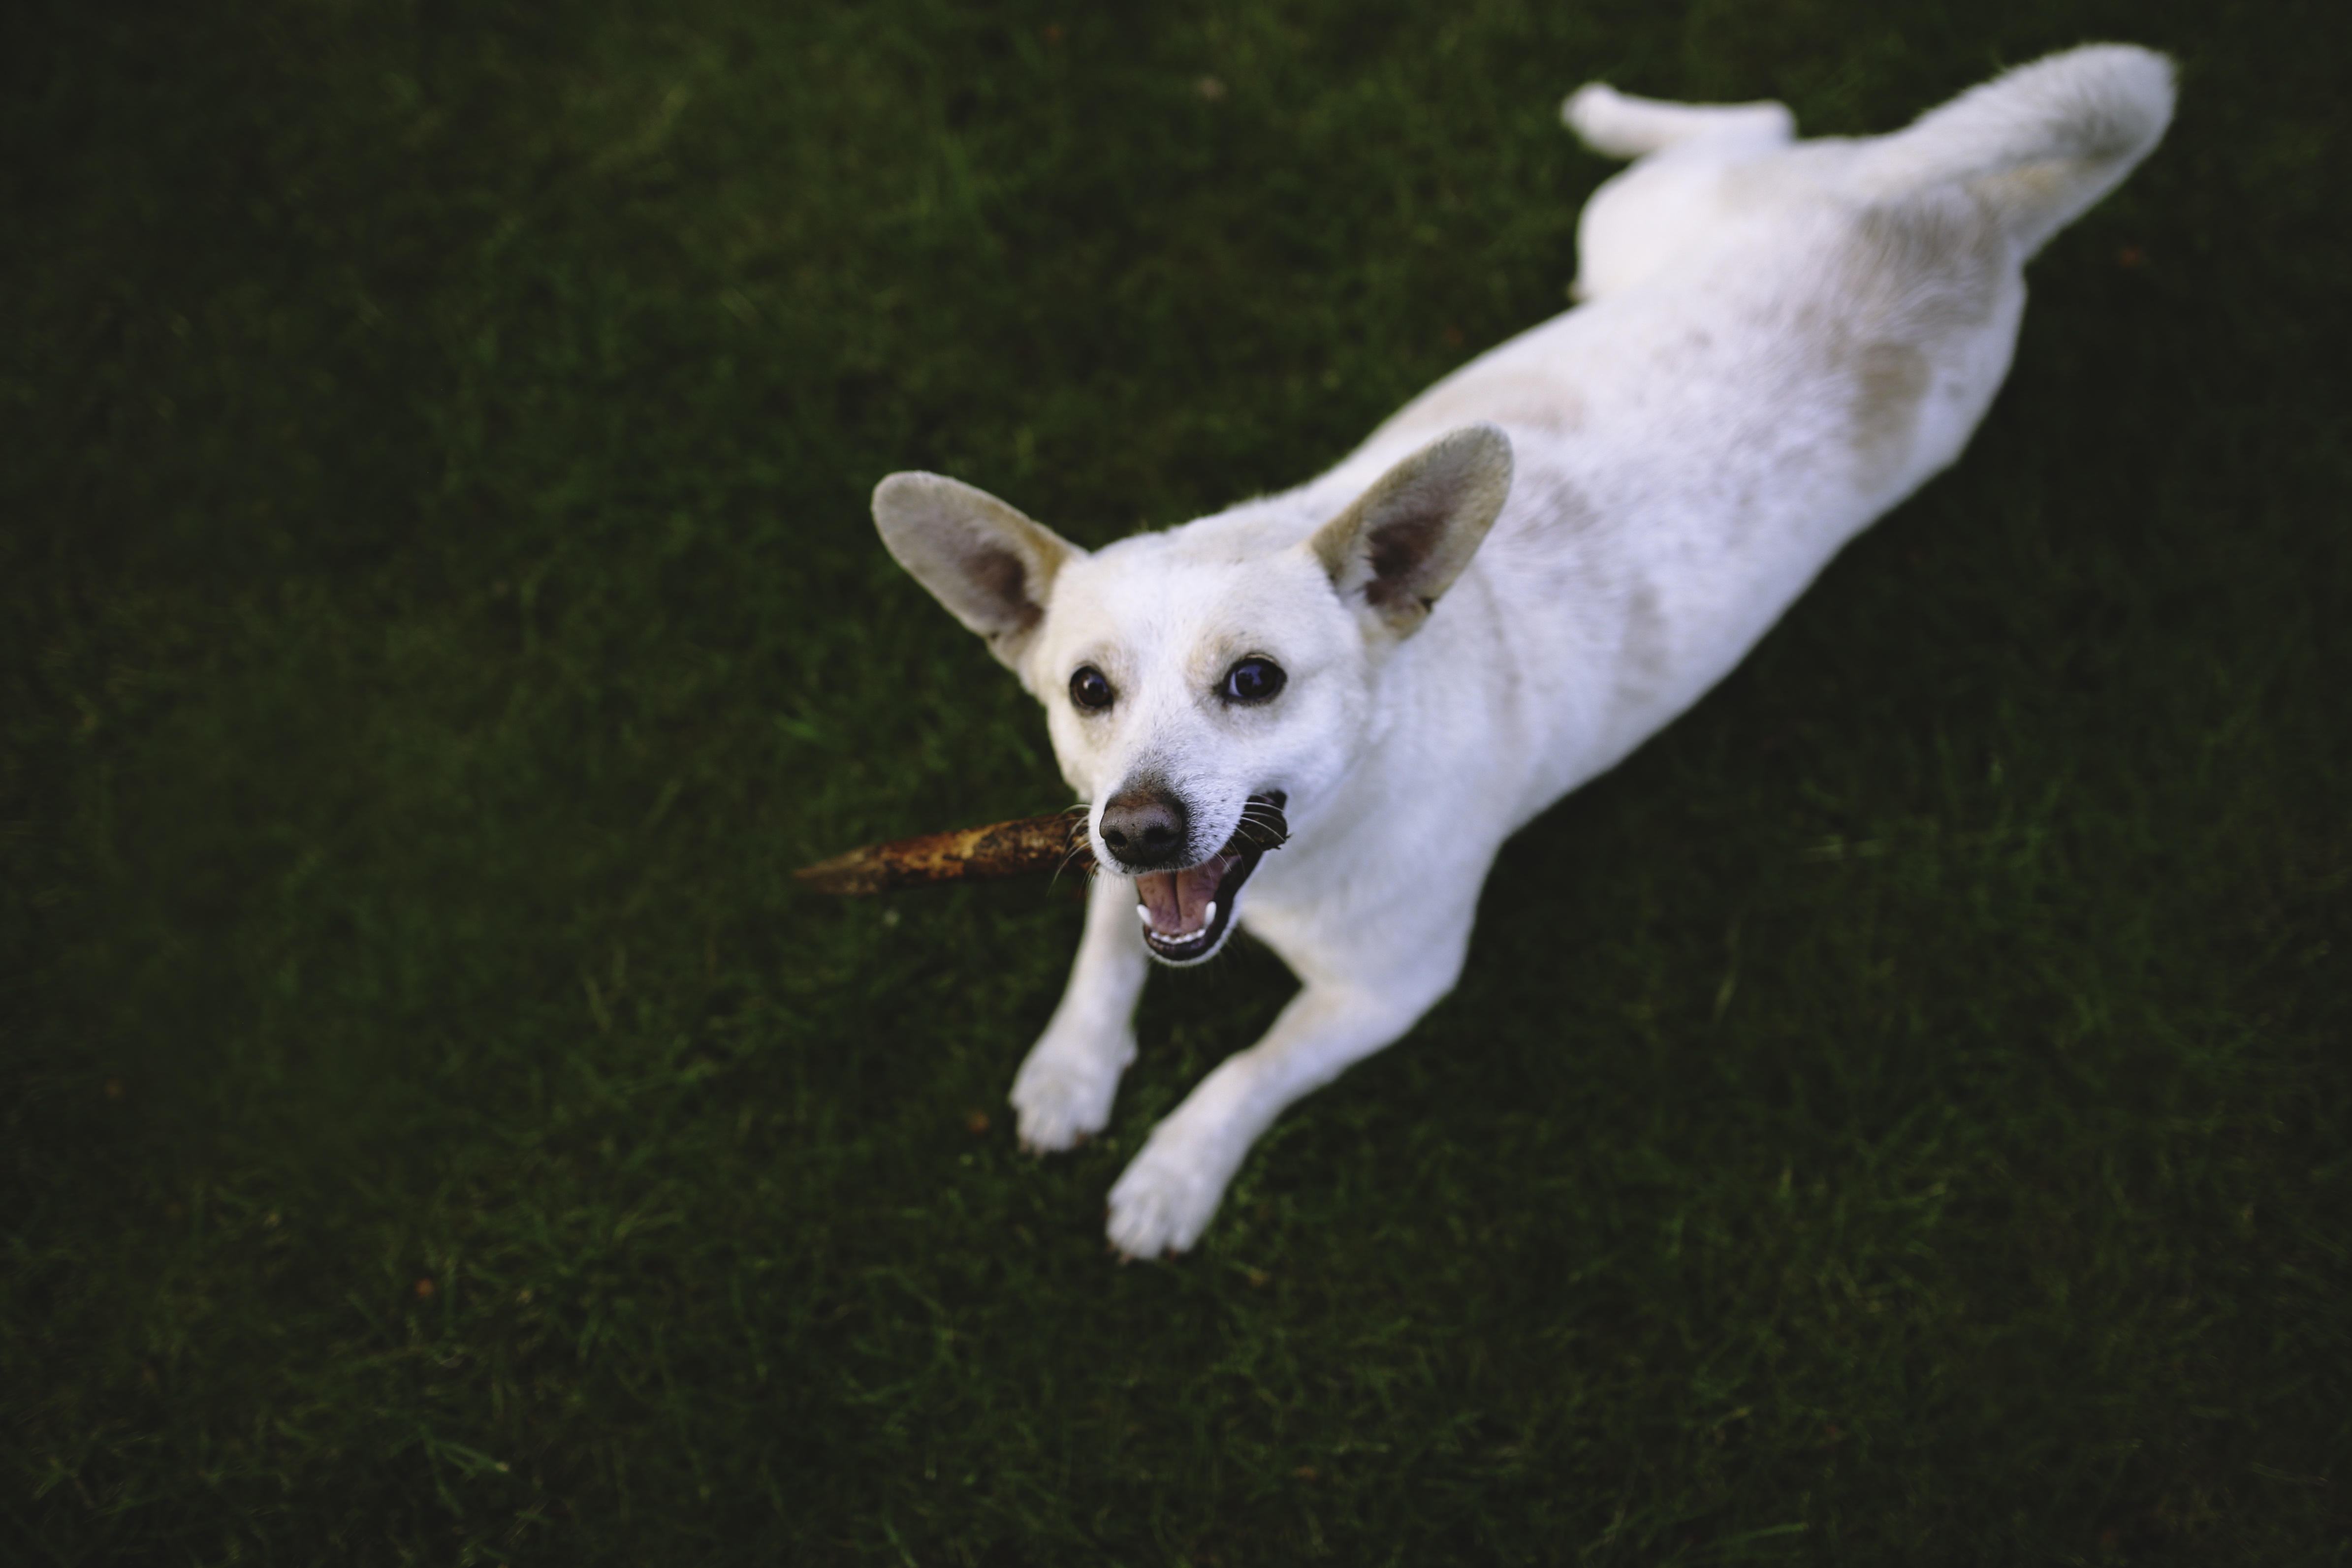 Free Images : nature, grass, outdoor, white, play, animal, playing ...